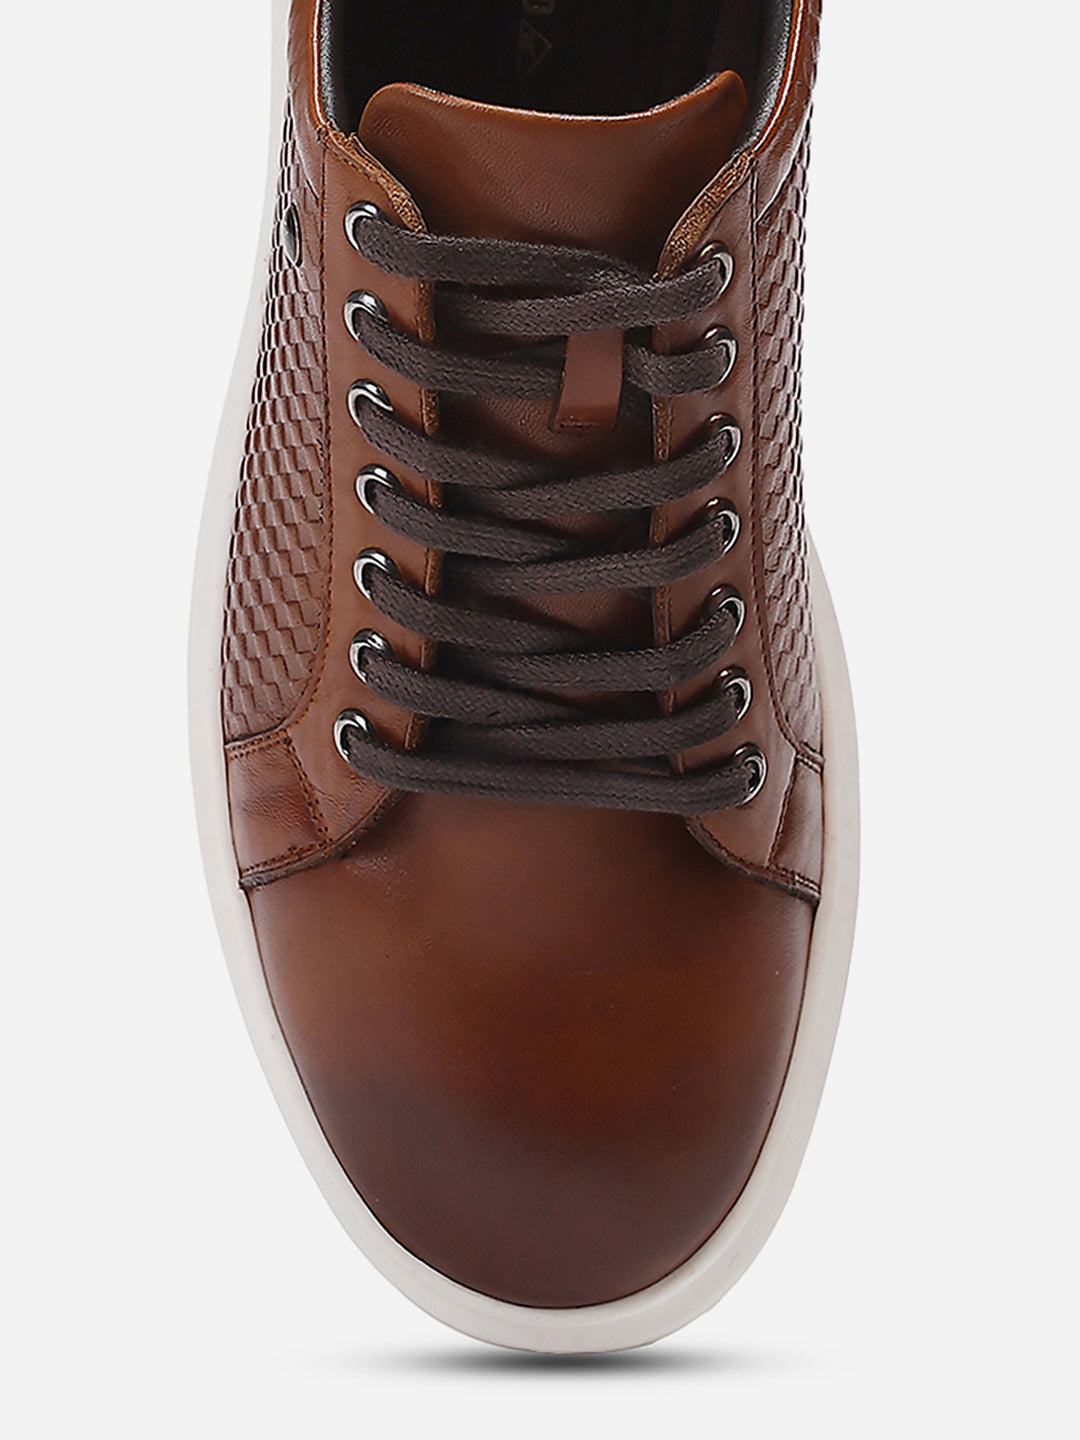 Mens Tan Solid Lace Up Genuine Leather Casual Sneaker